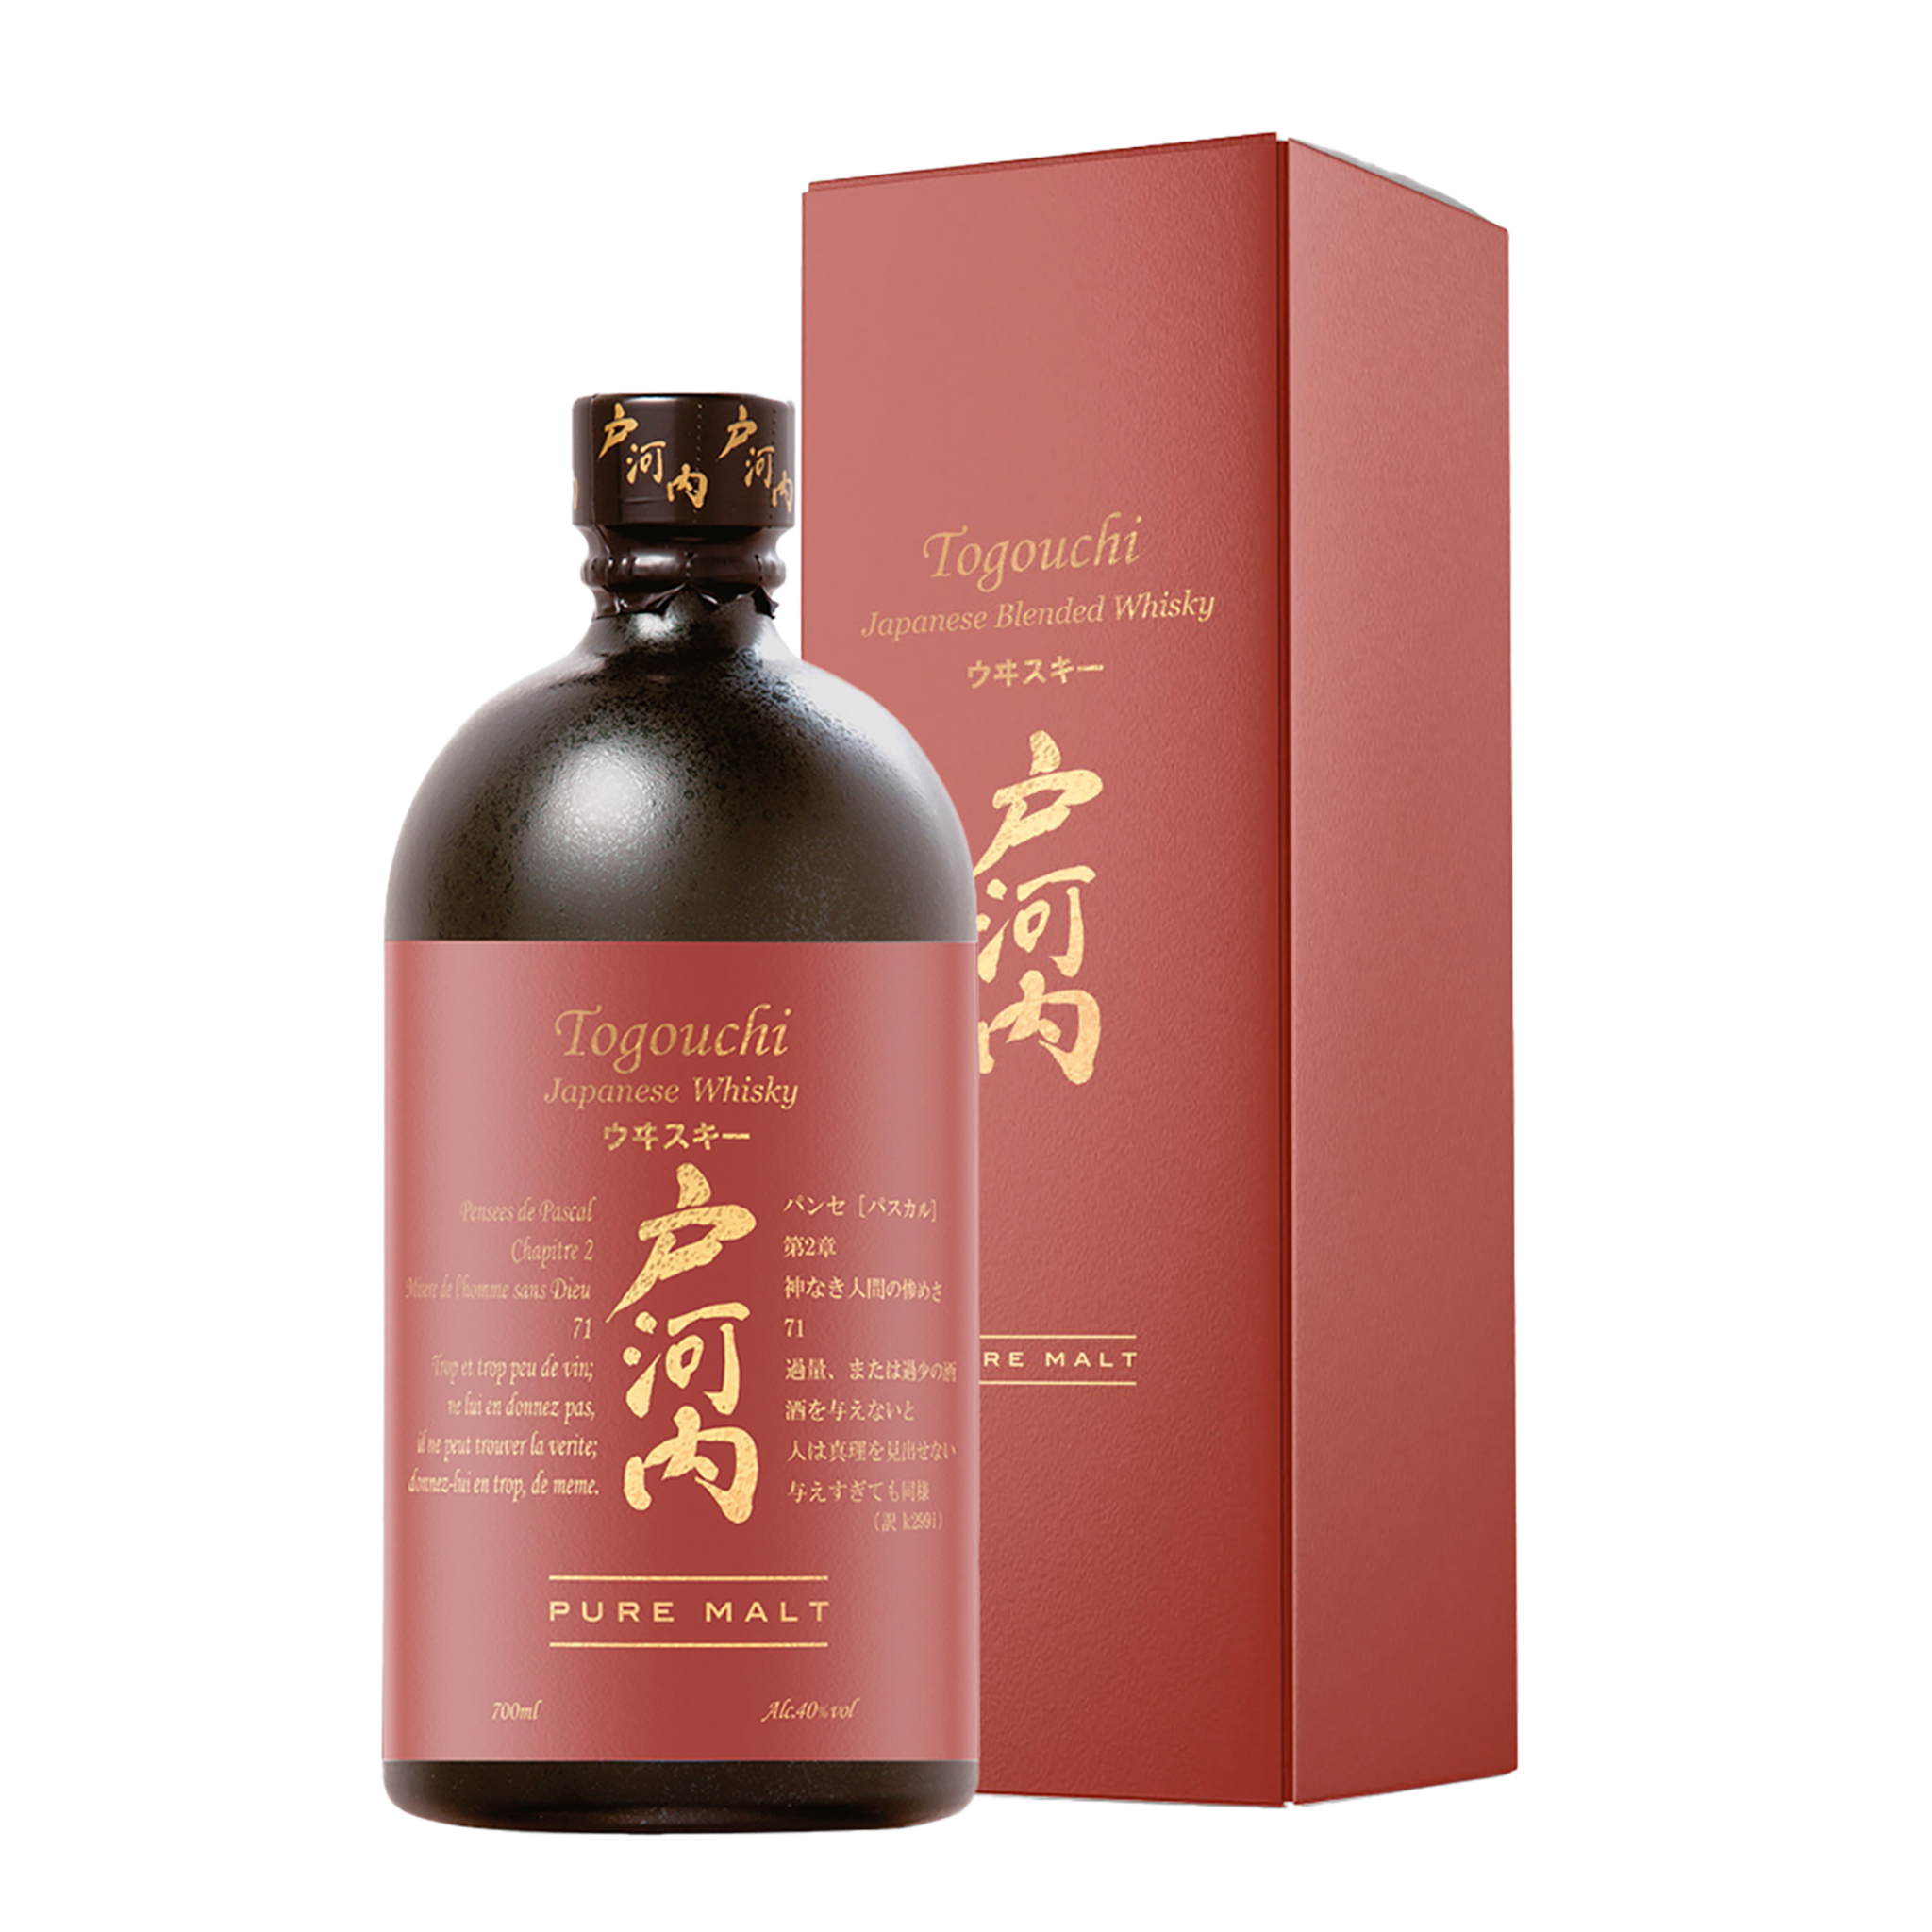 Where to buy Togouchi 18 Year Old Blended Whisky, Japan